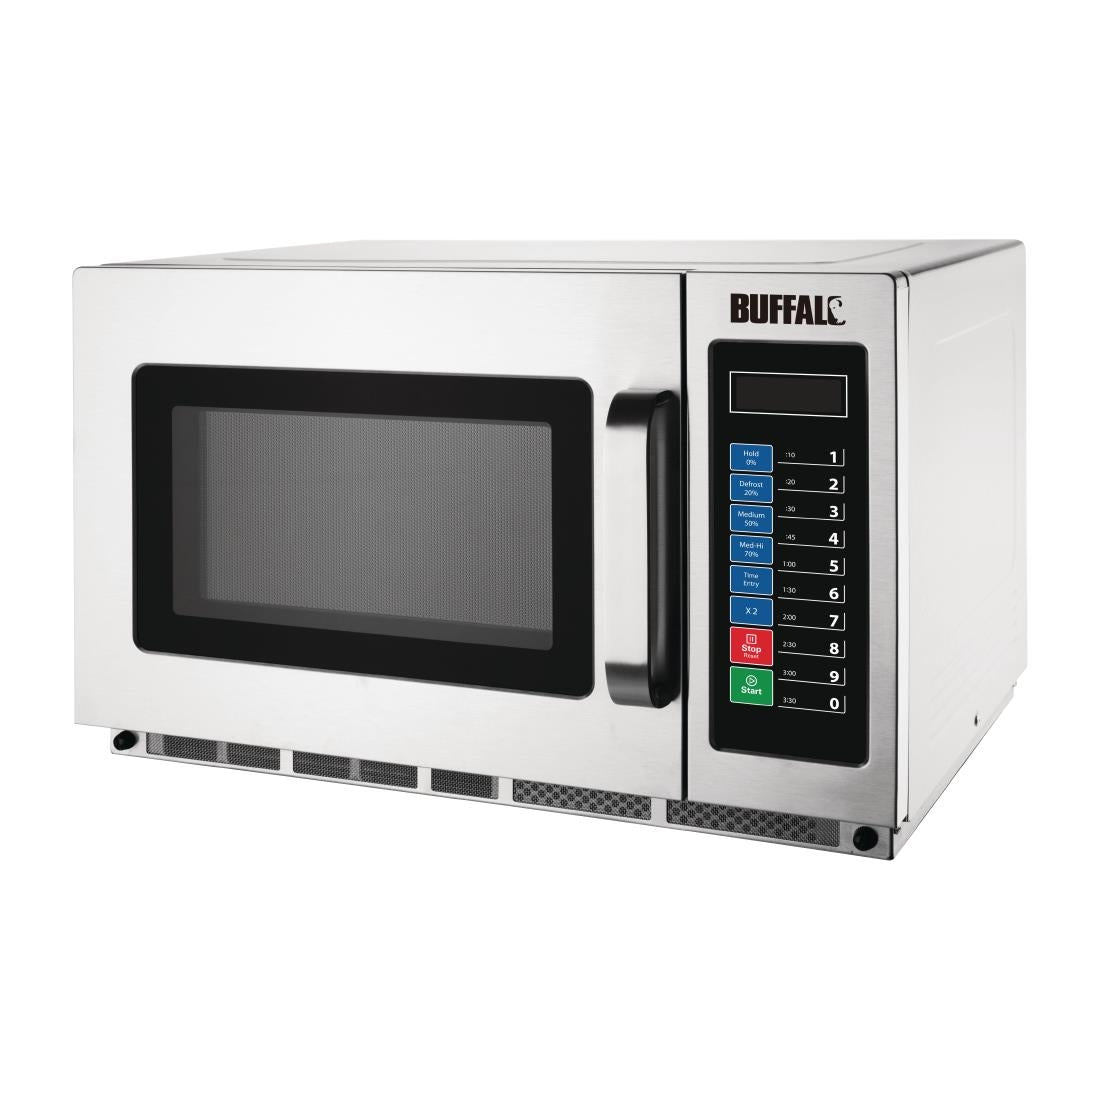 FB864 Buffalo Programmable Commercial Microwave Oven 34ltr 1800W JD Catering Equipment Solutions Ltd